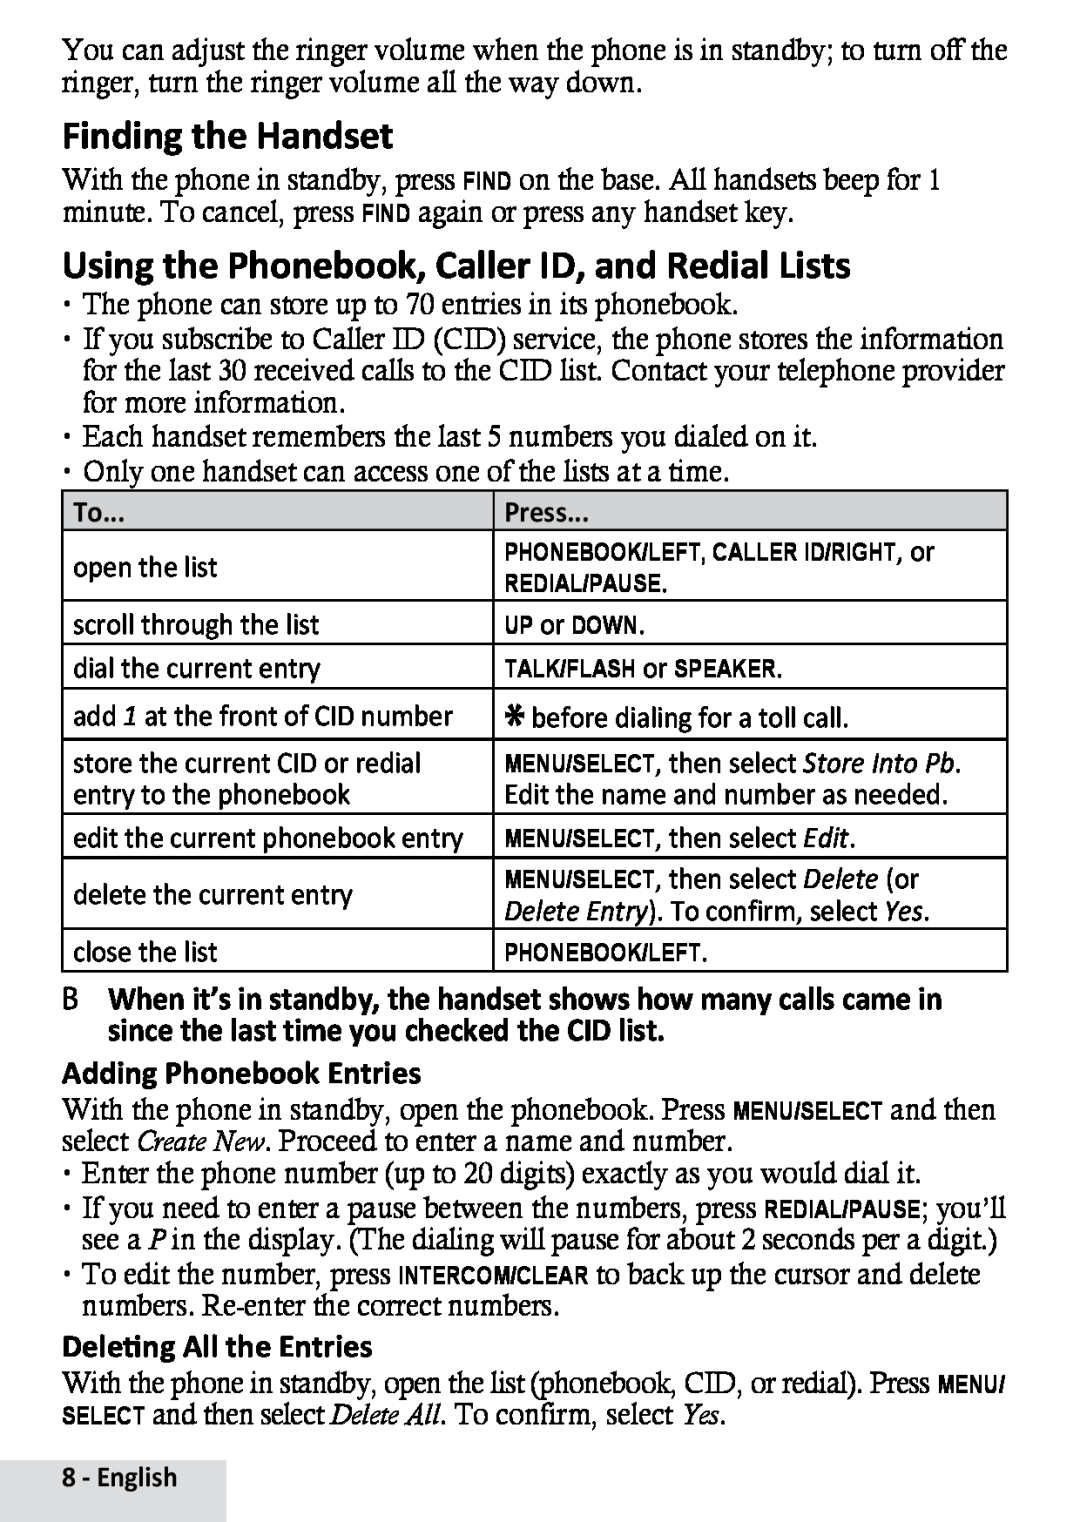 Uniden D1484-3 Finding the Handset, Using the Phonebook, Caller ID, and Redial Lists, Adding Phonebook Entries, English 